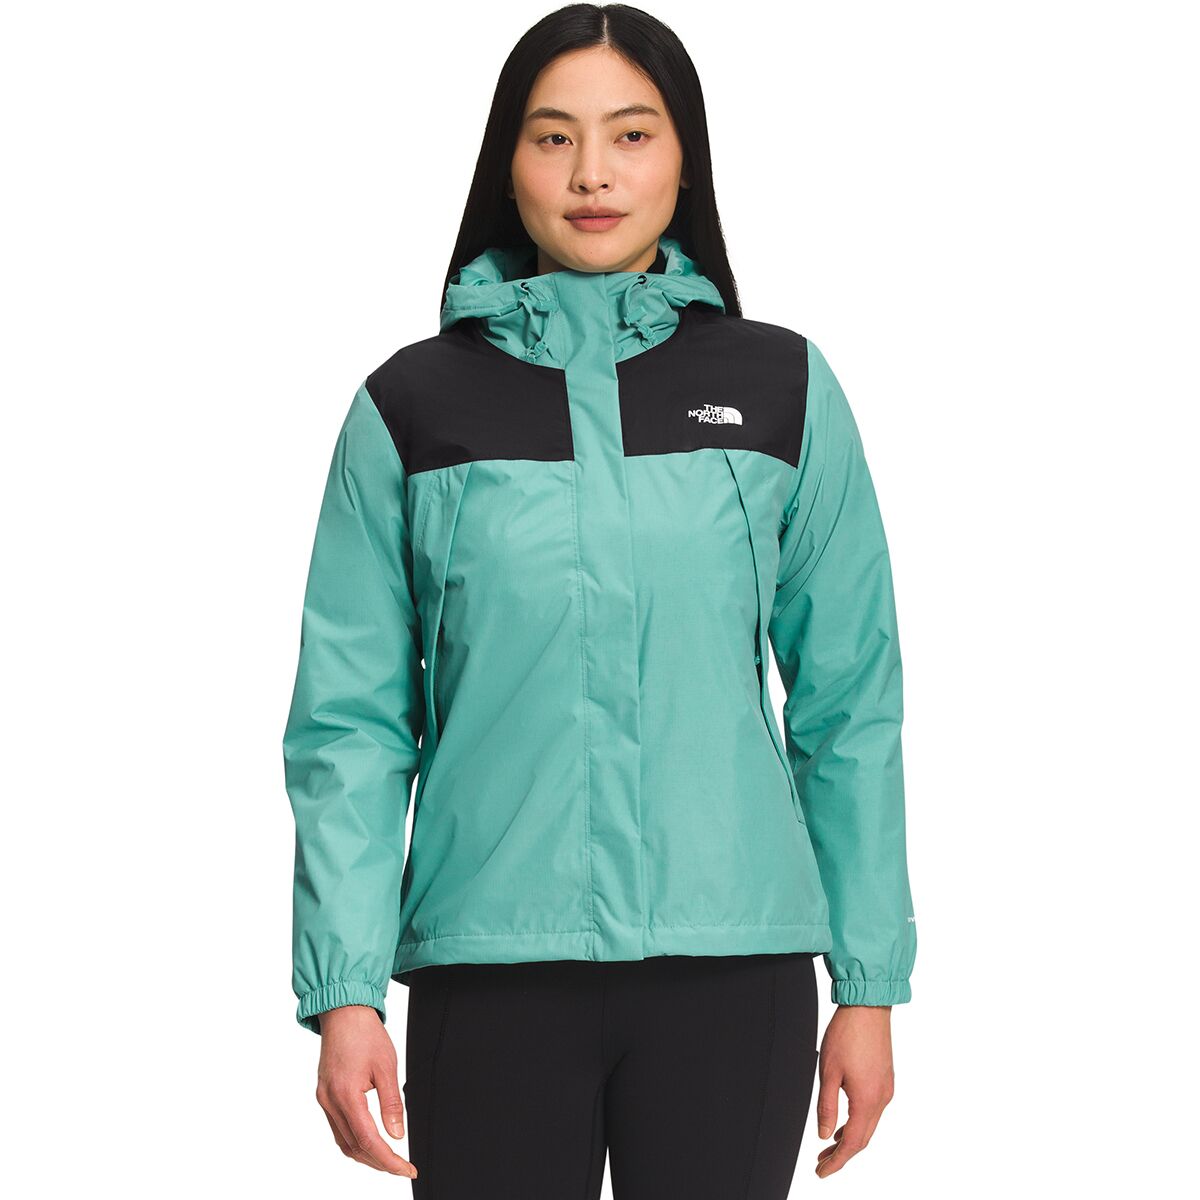 The North Face Women's 3-in-1 Jackets | Backcountry.com